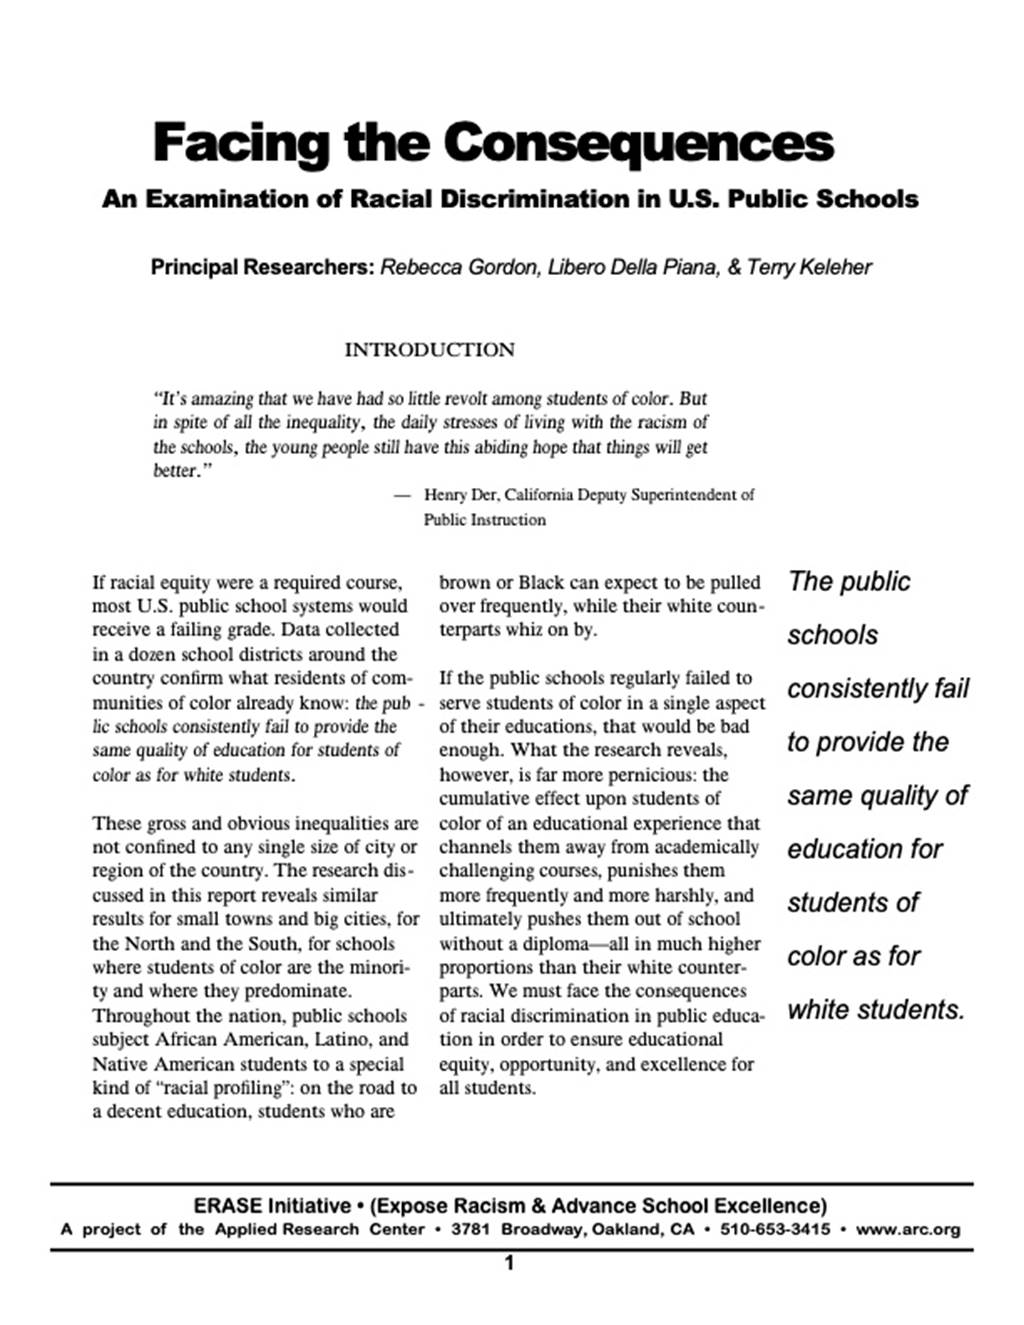 Facing the Consequences: An Examination of Racial Discrimination in U.S. Public Schools - Document image